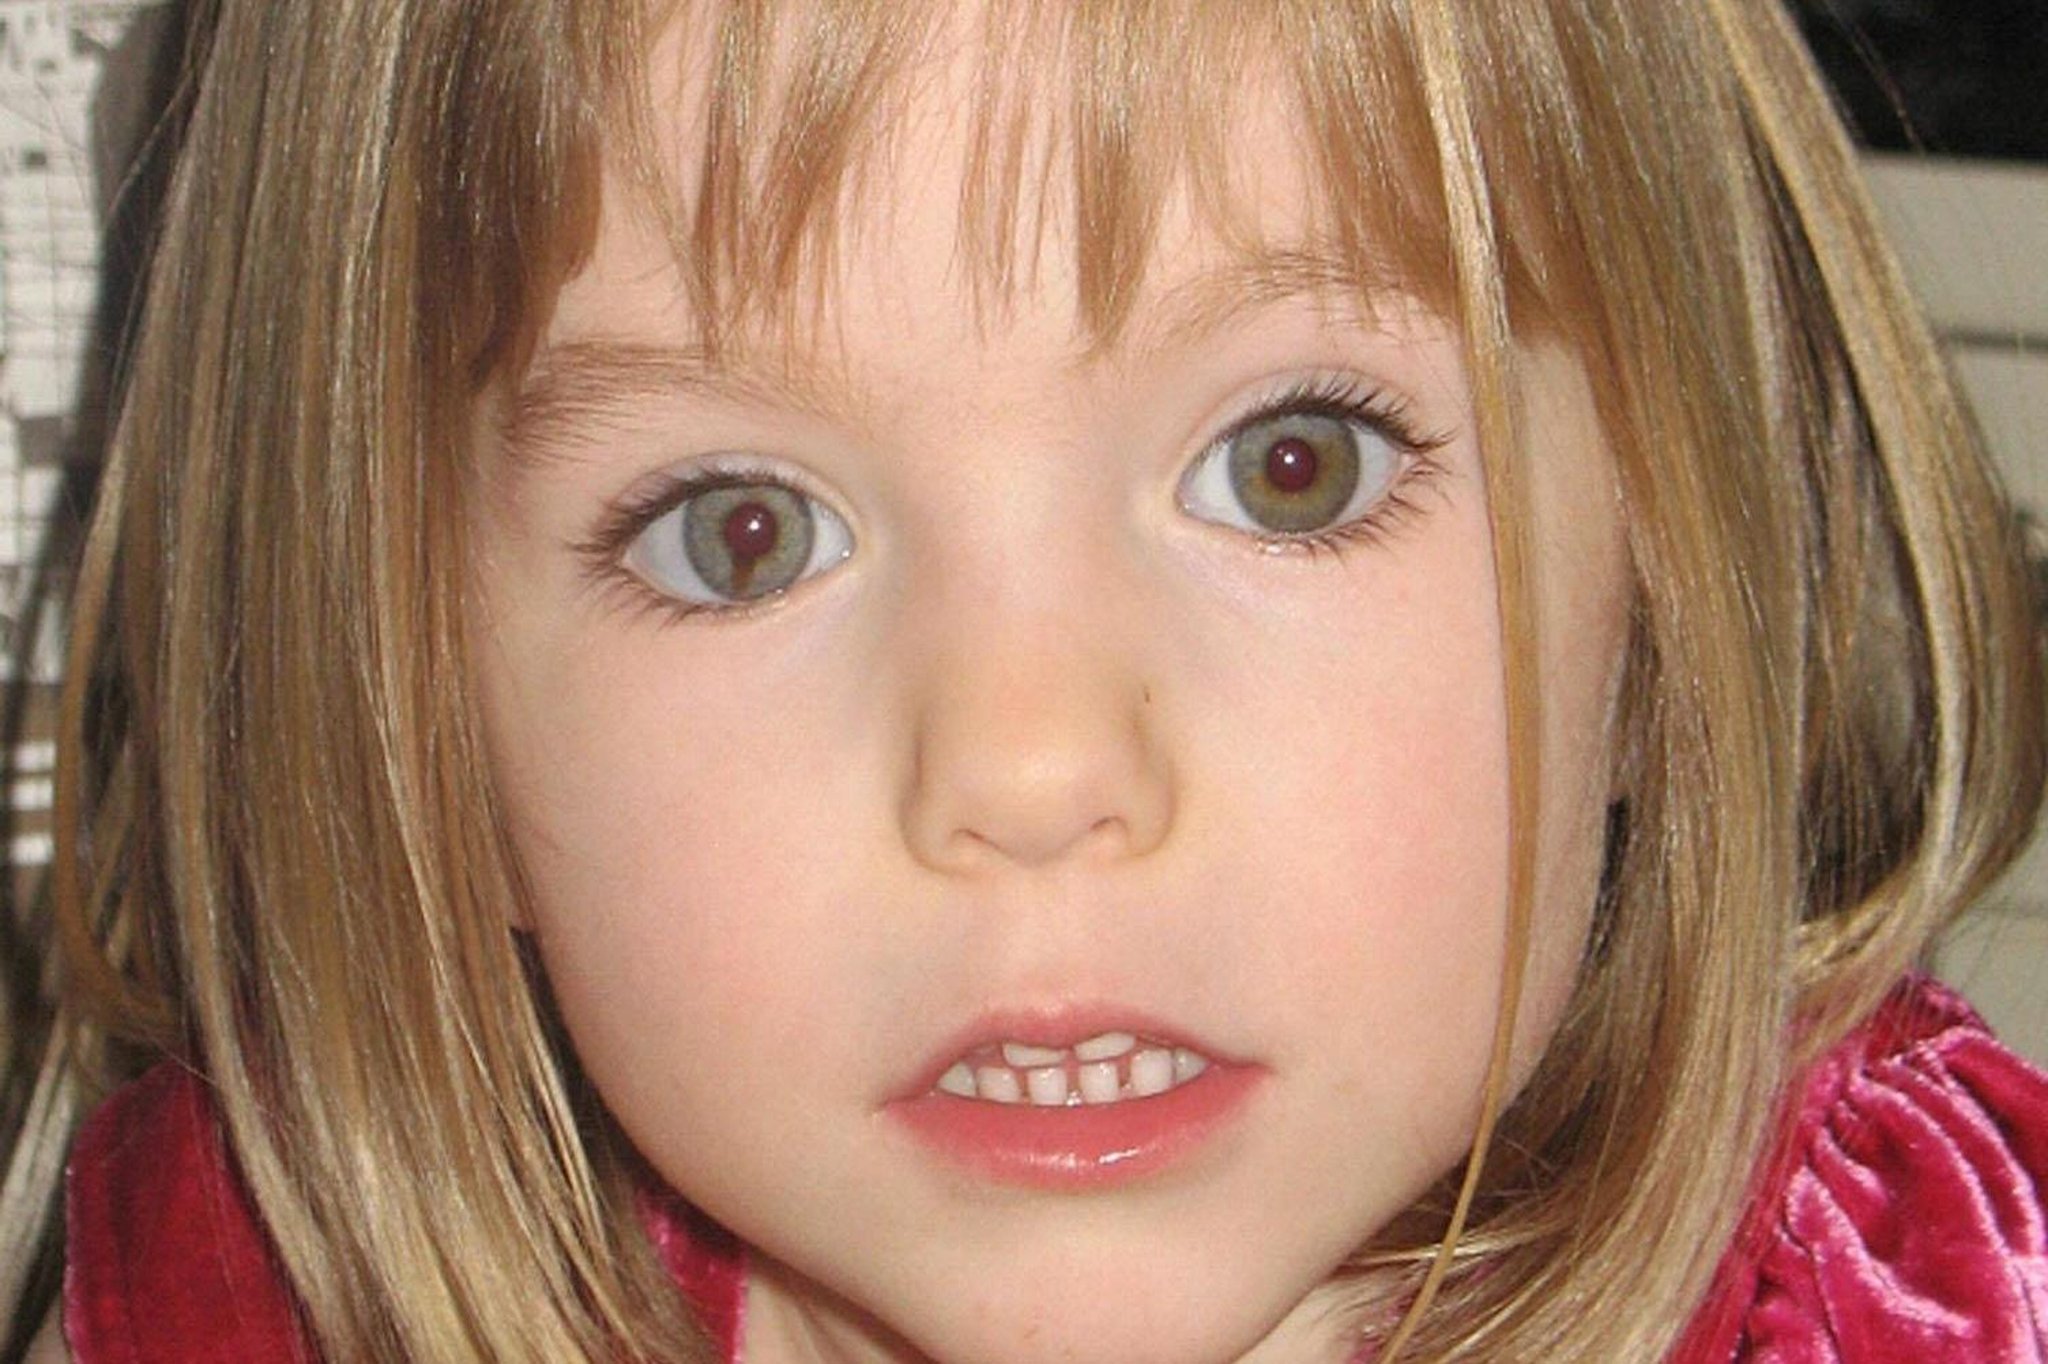 Madeleine McCann suspect 'could face charges within weeks' claim